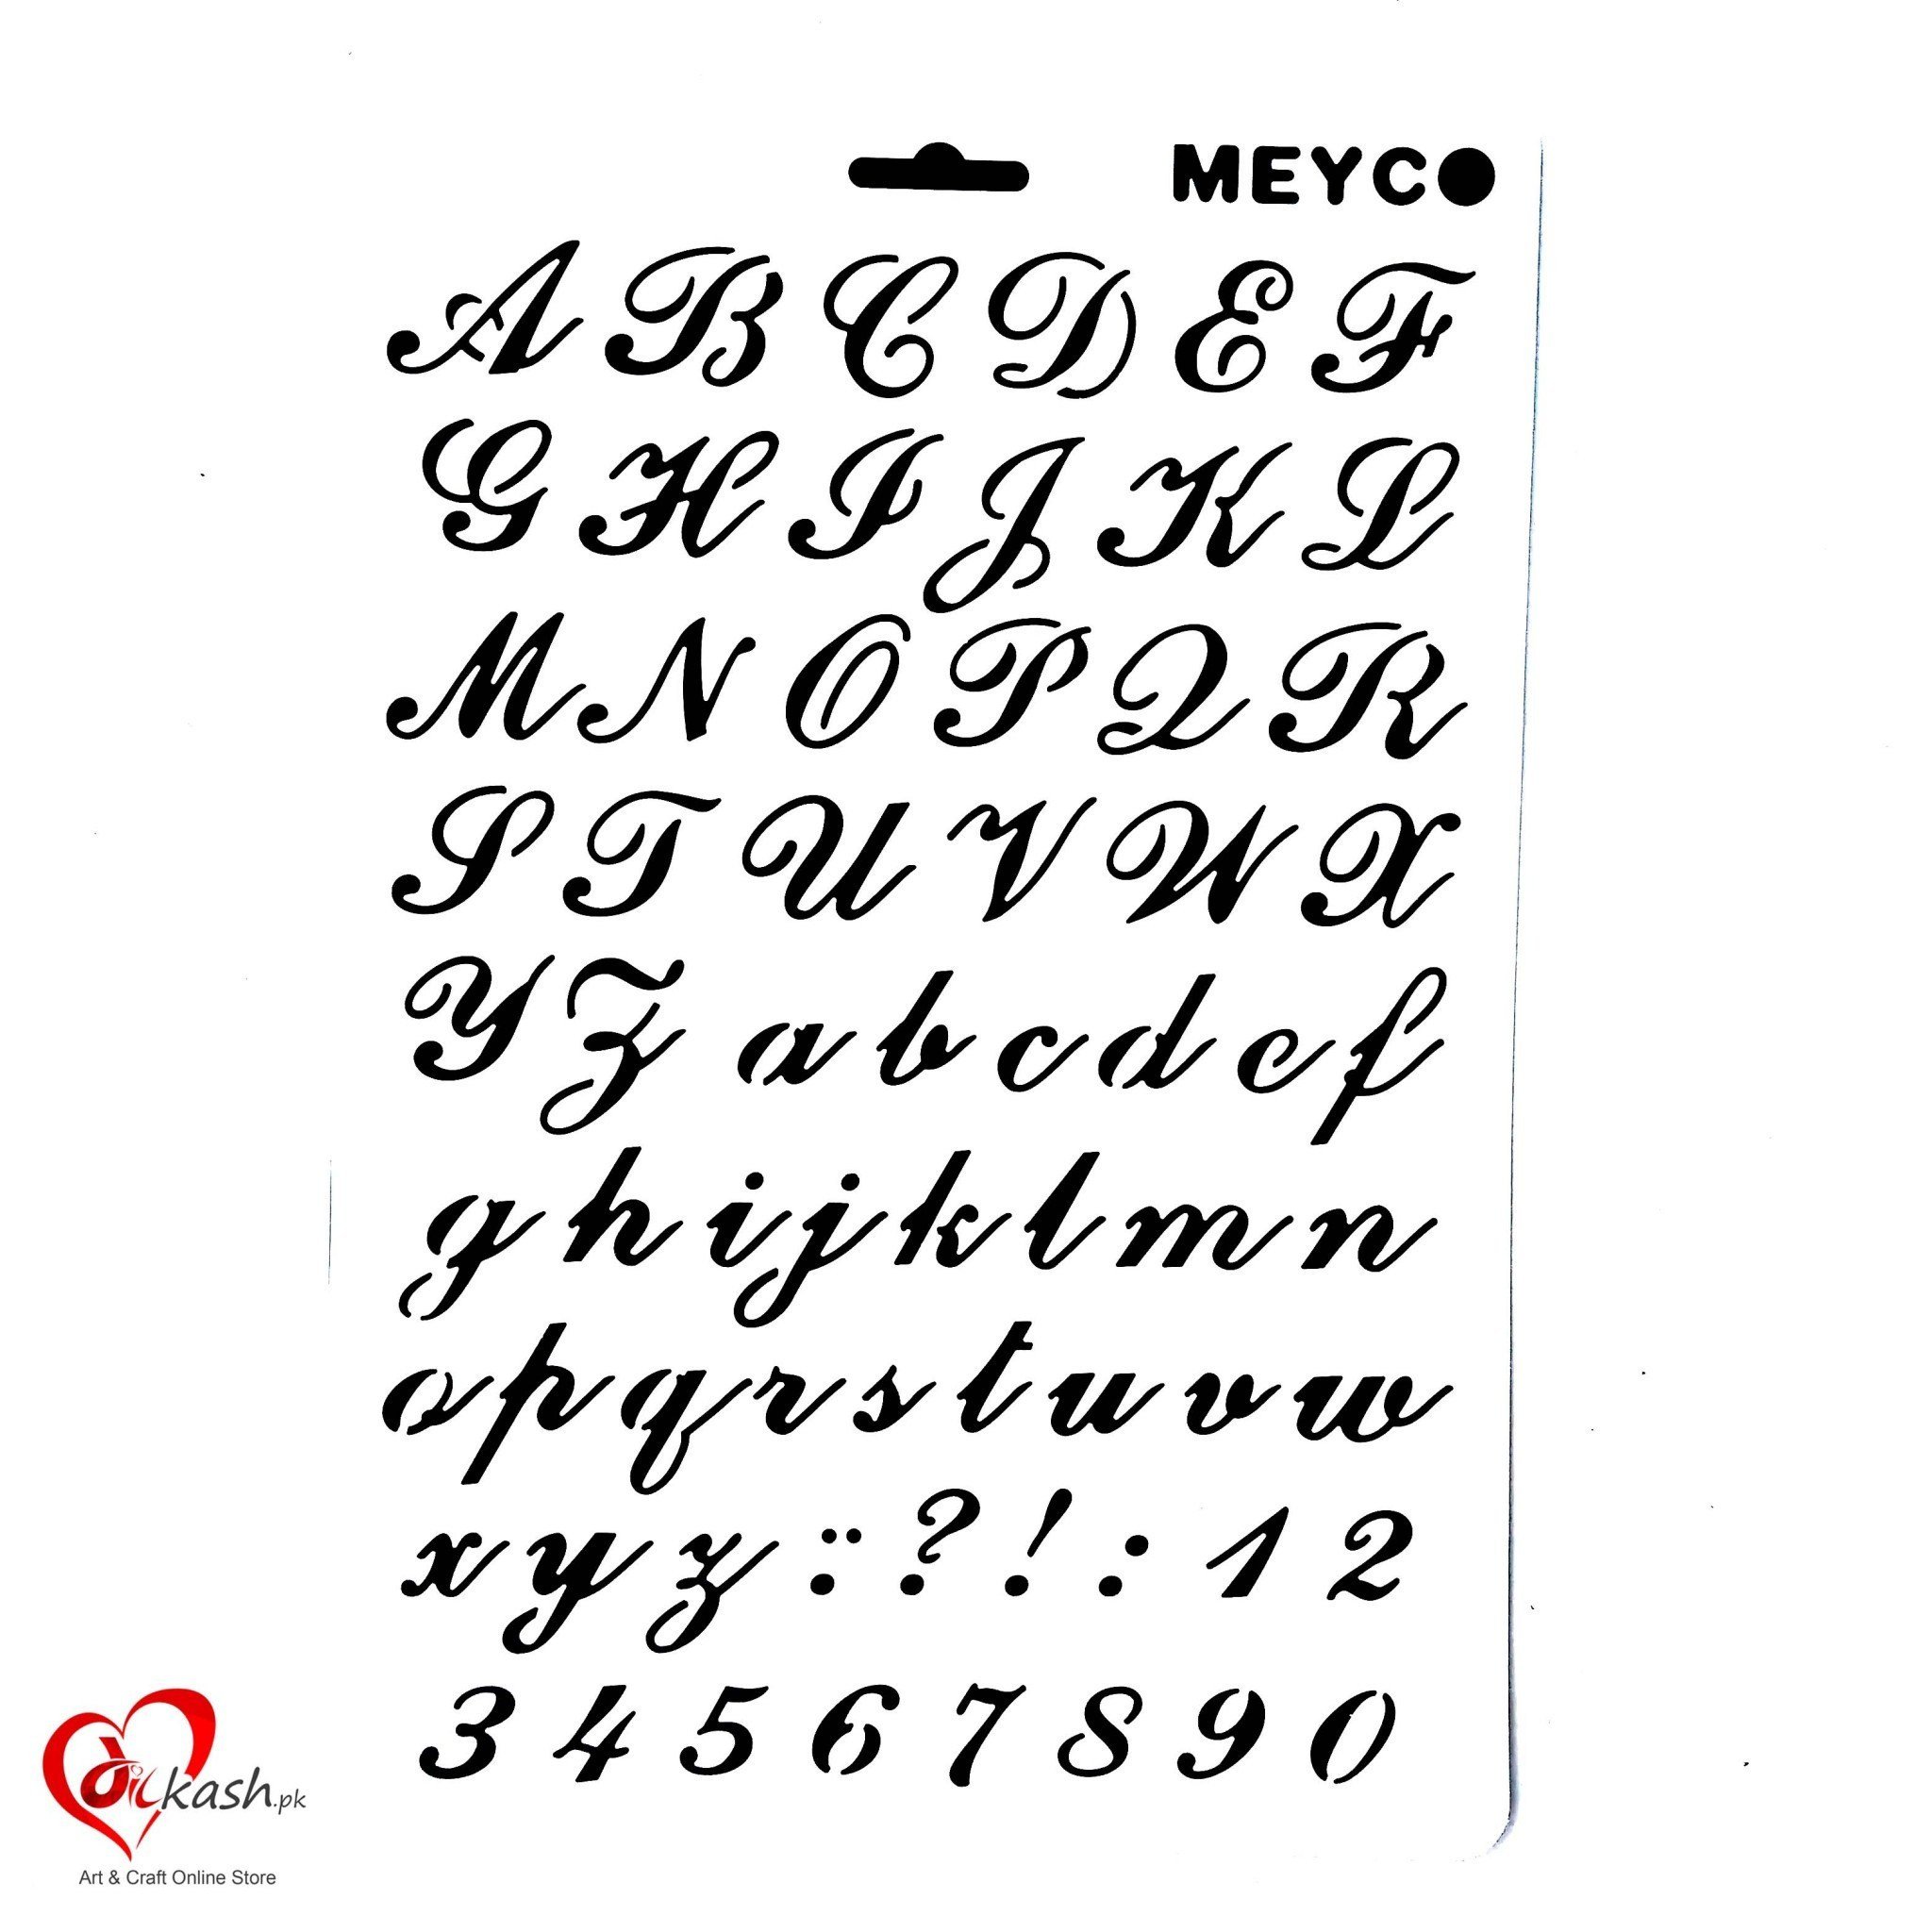 Alphabet Stencils for Painting 8x12 Inches Wall Stencils for Painting Designs